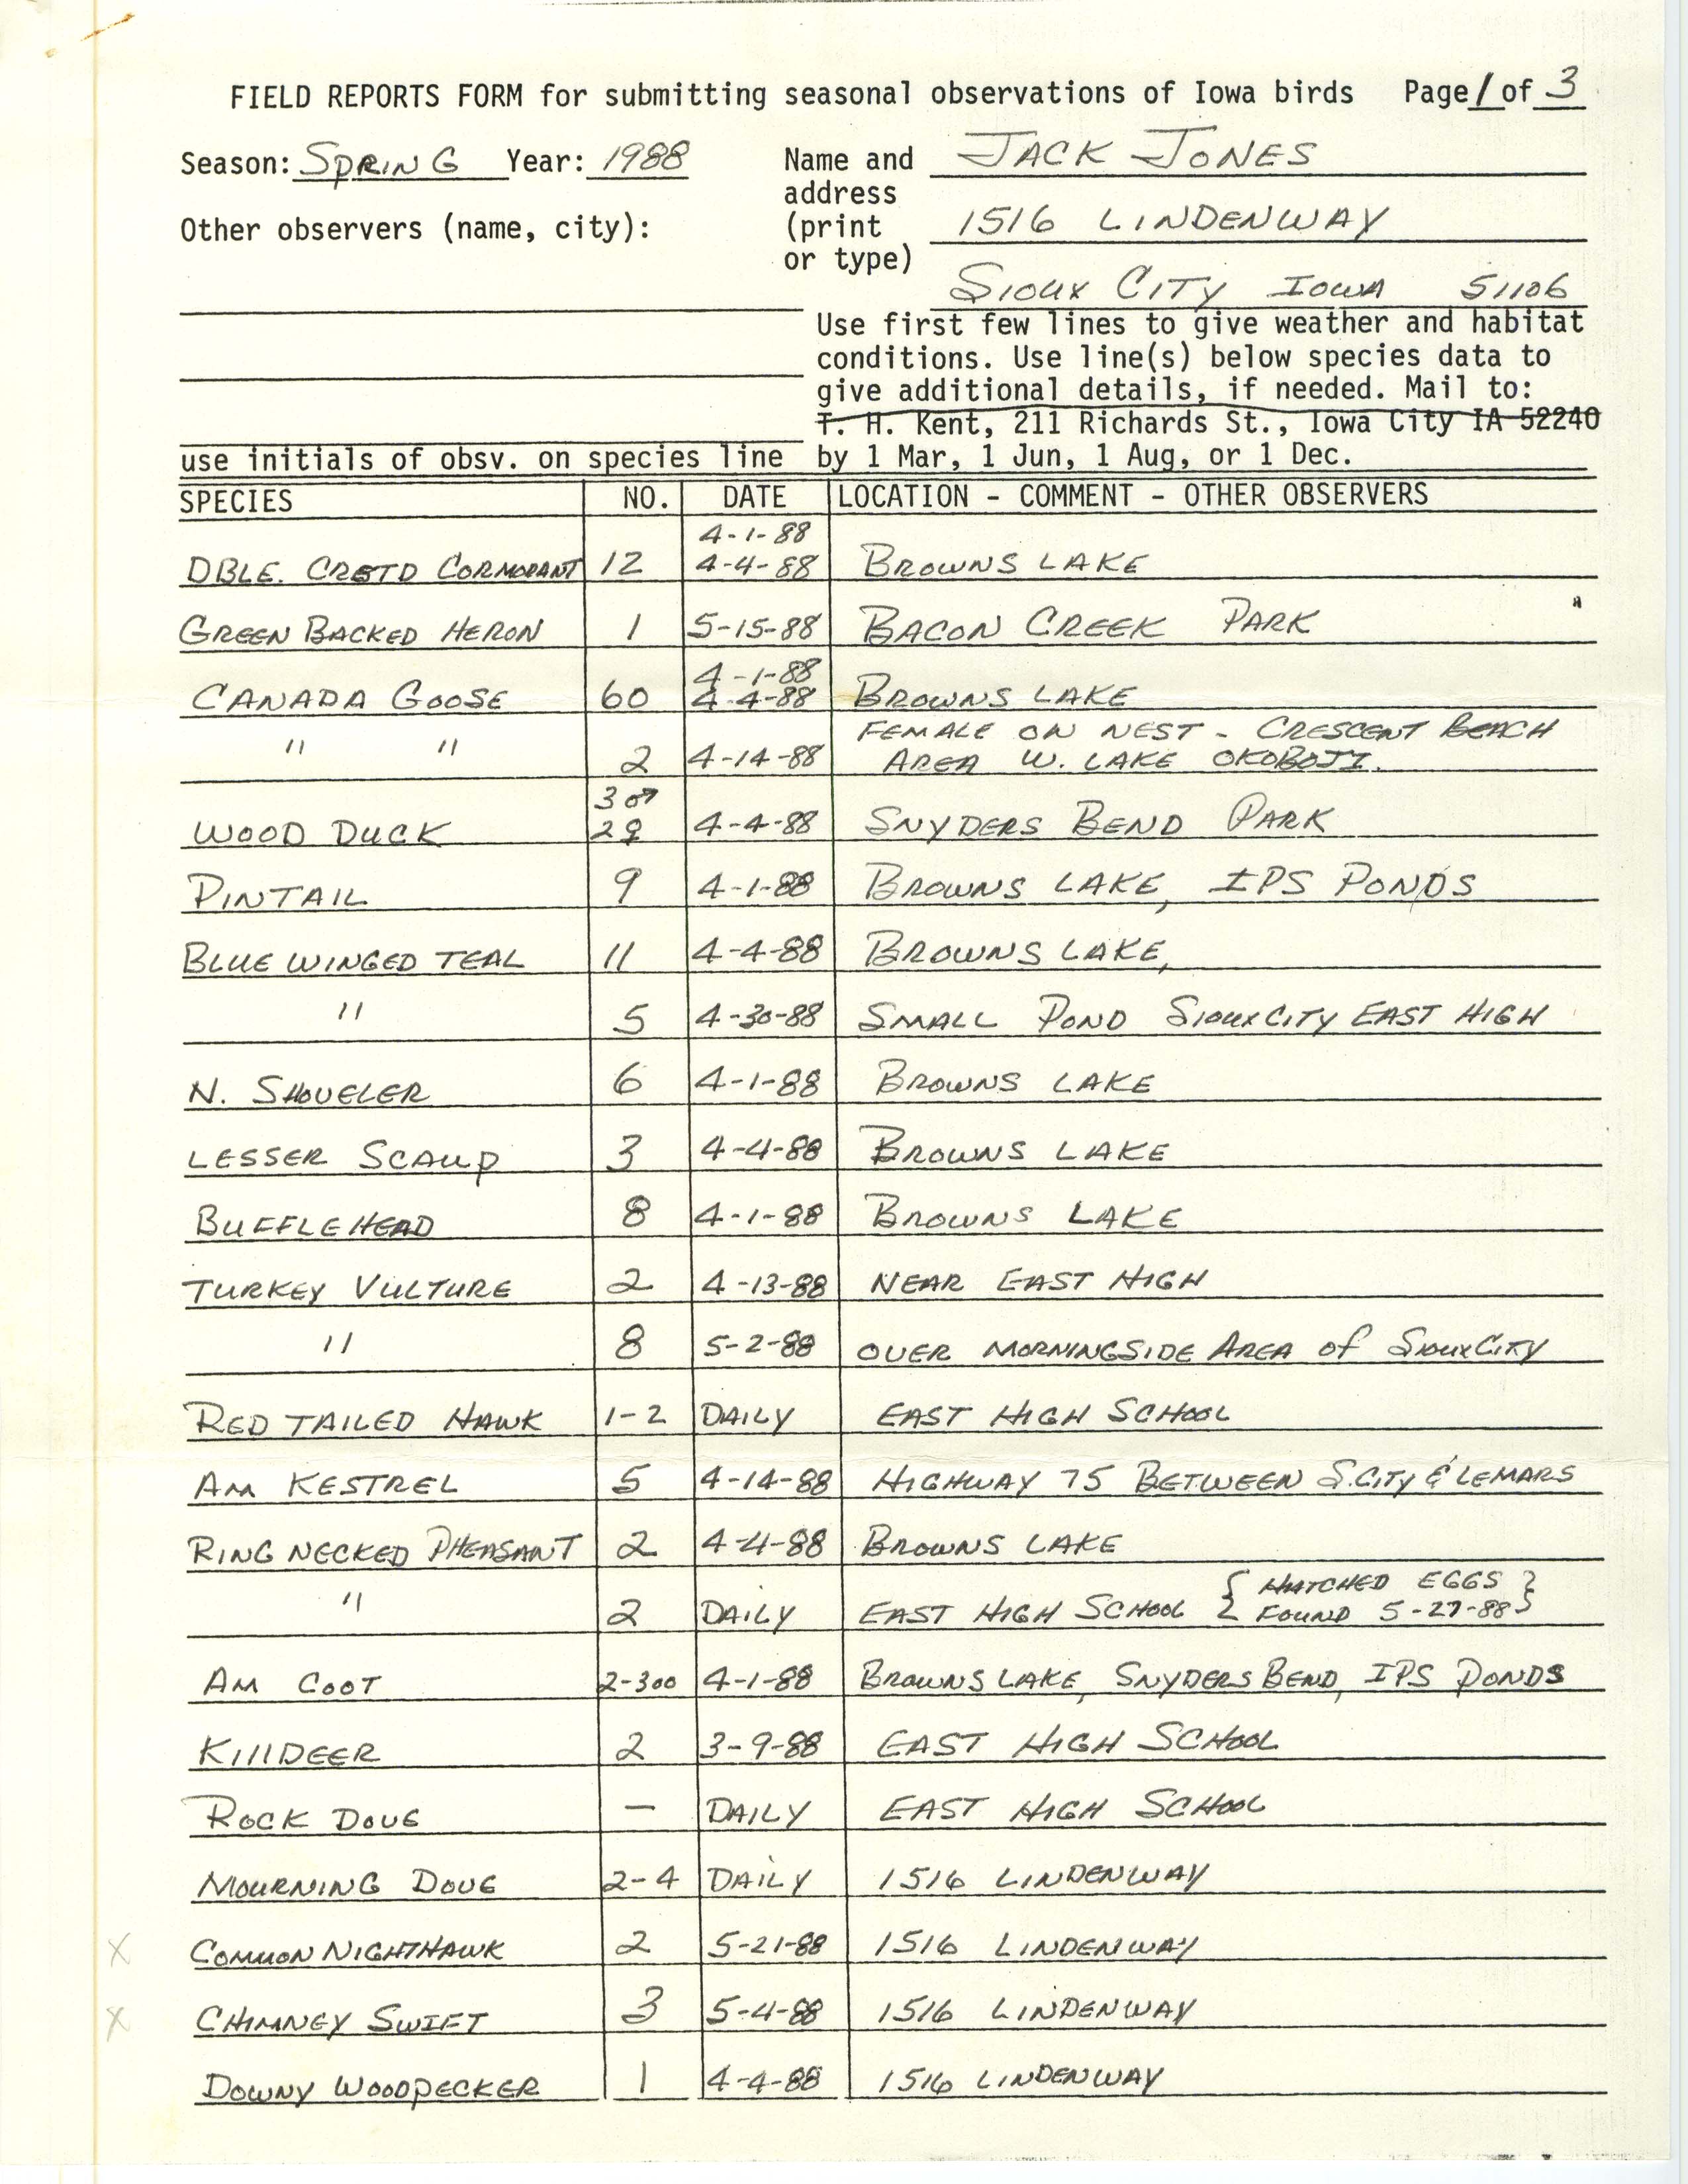 Field reports form for submitting seasonal observations of Iowa birds, Jack Jones, spring 1988